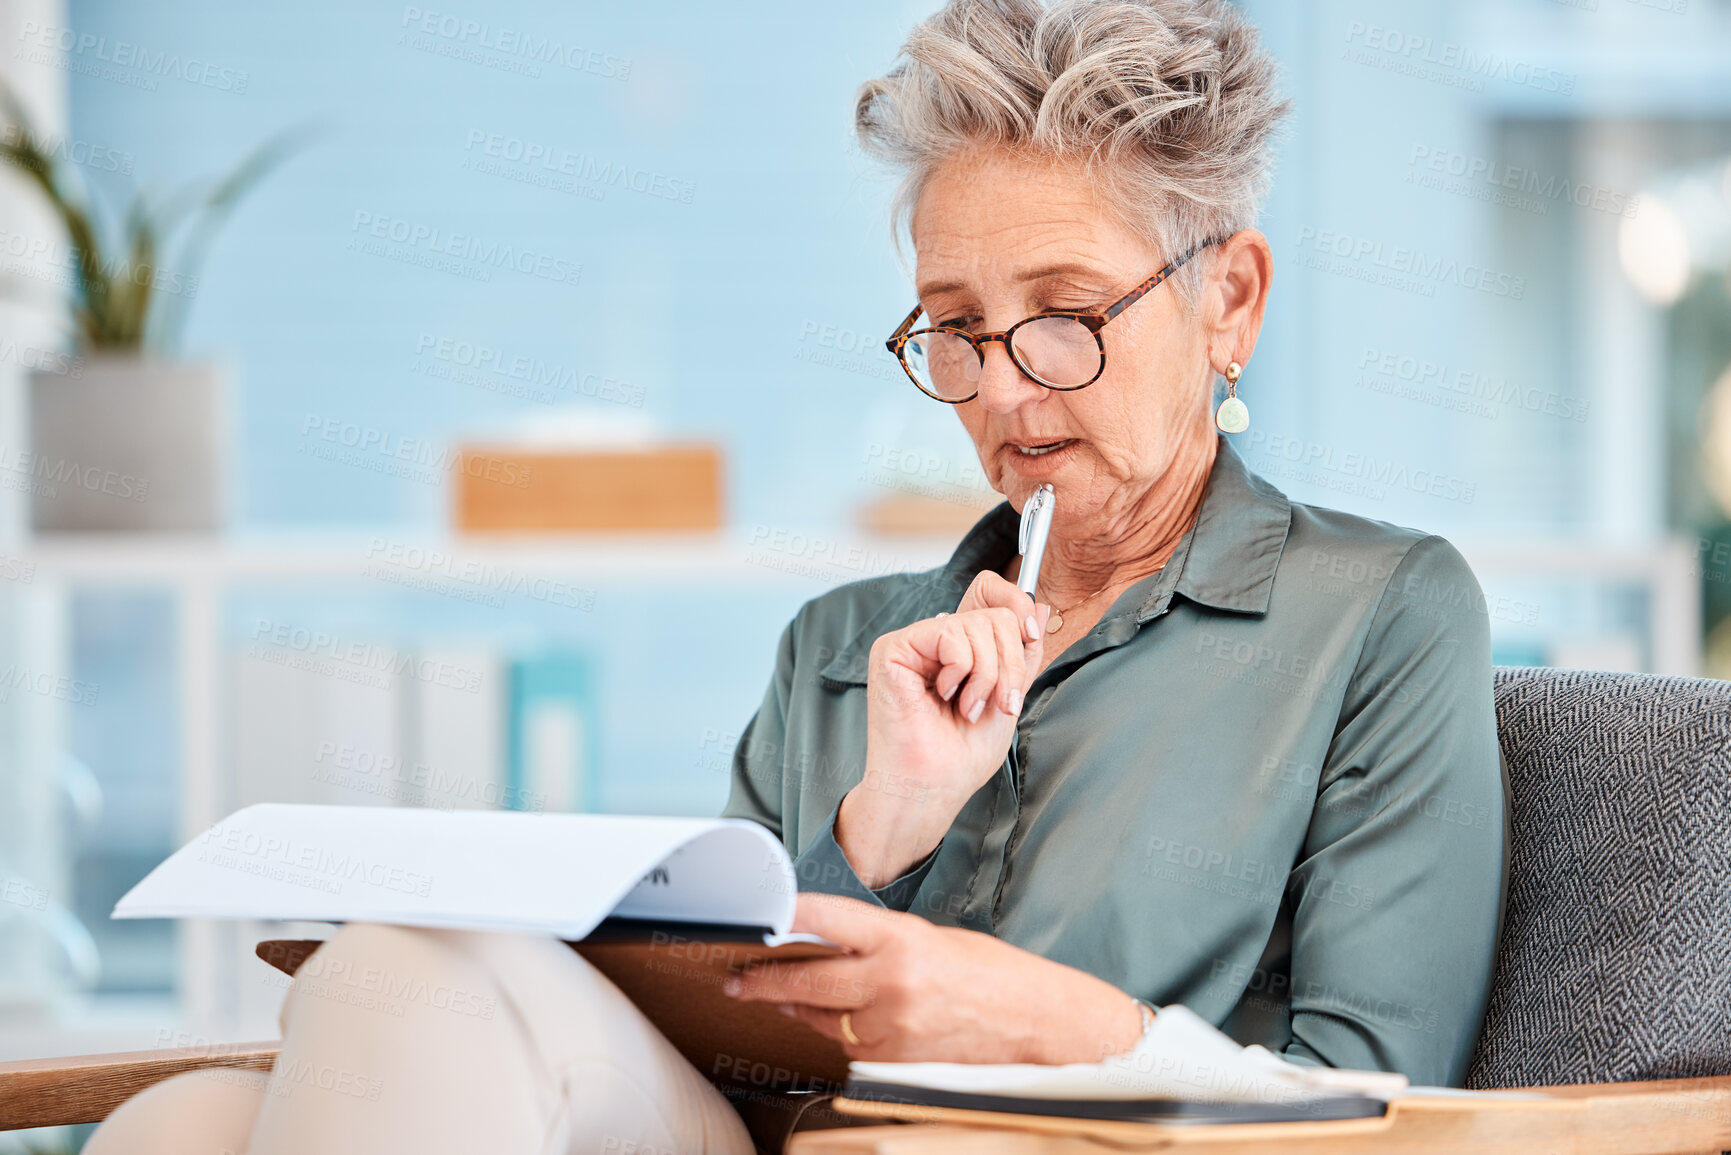 Buy stock photo Thinking, documents and business with a senior woman reading while sitting in a chair at work. Data, writing and idea with a mature female CEO, manager or boss contemplating growth or development